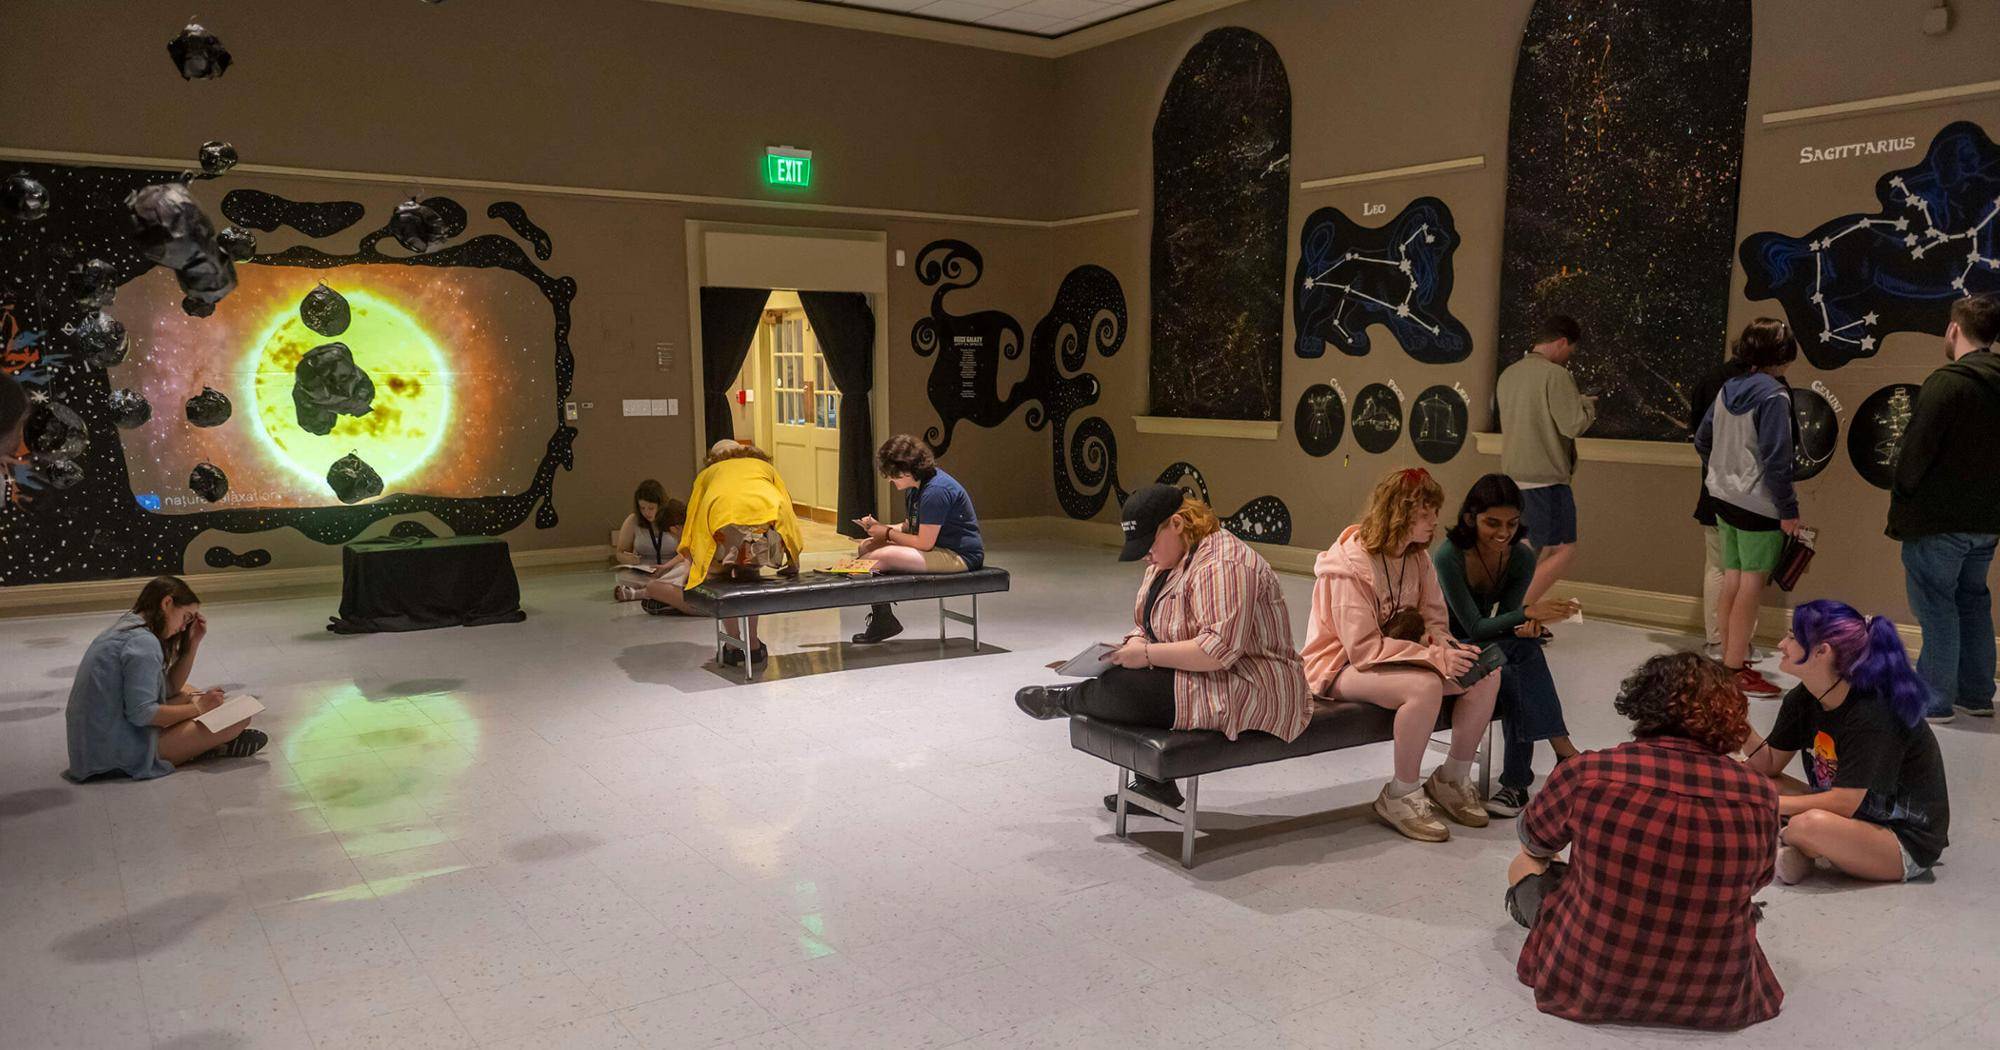 Image depicts students sitting in gallery painted to look like stars in space.